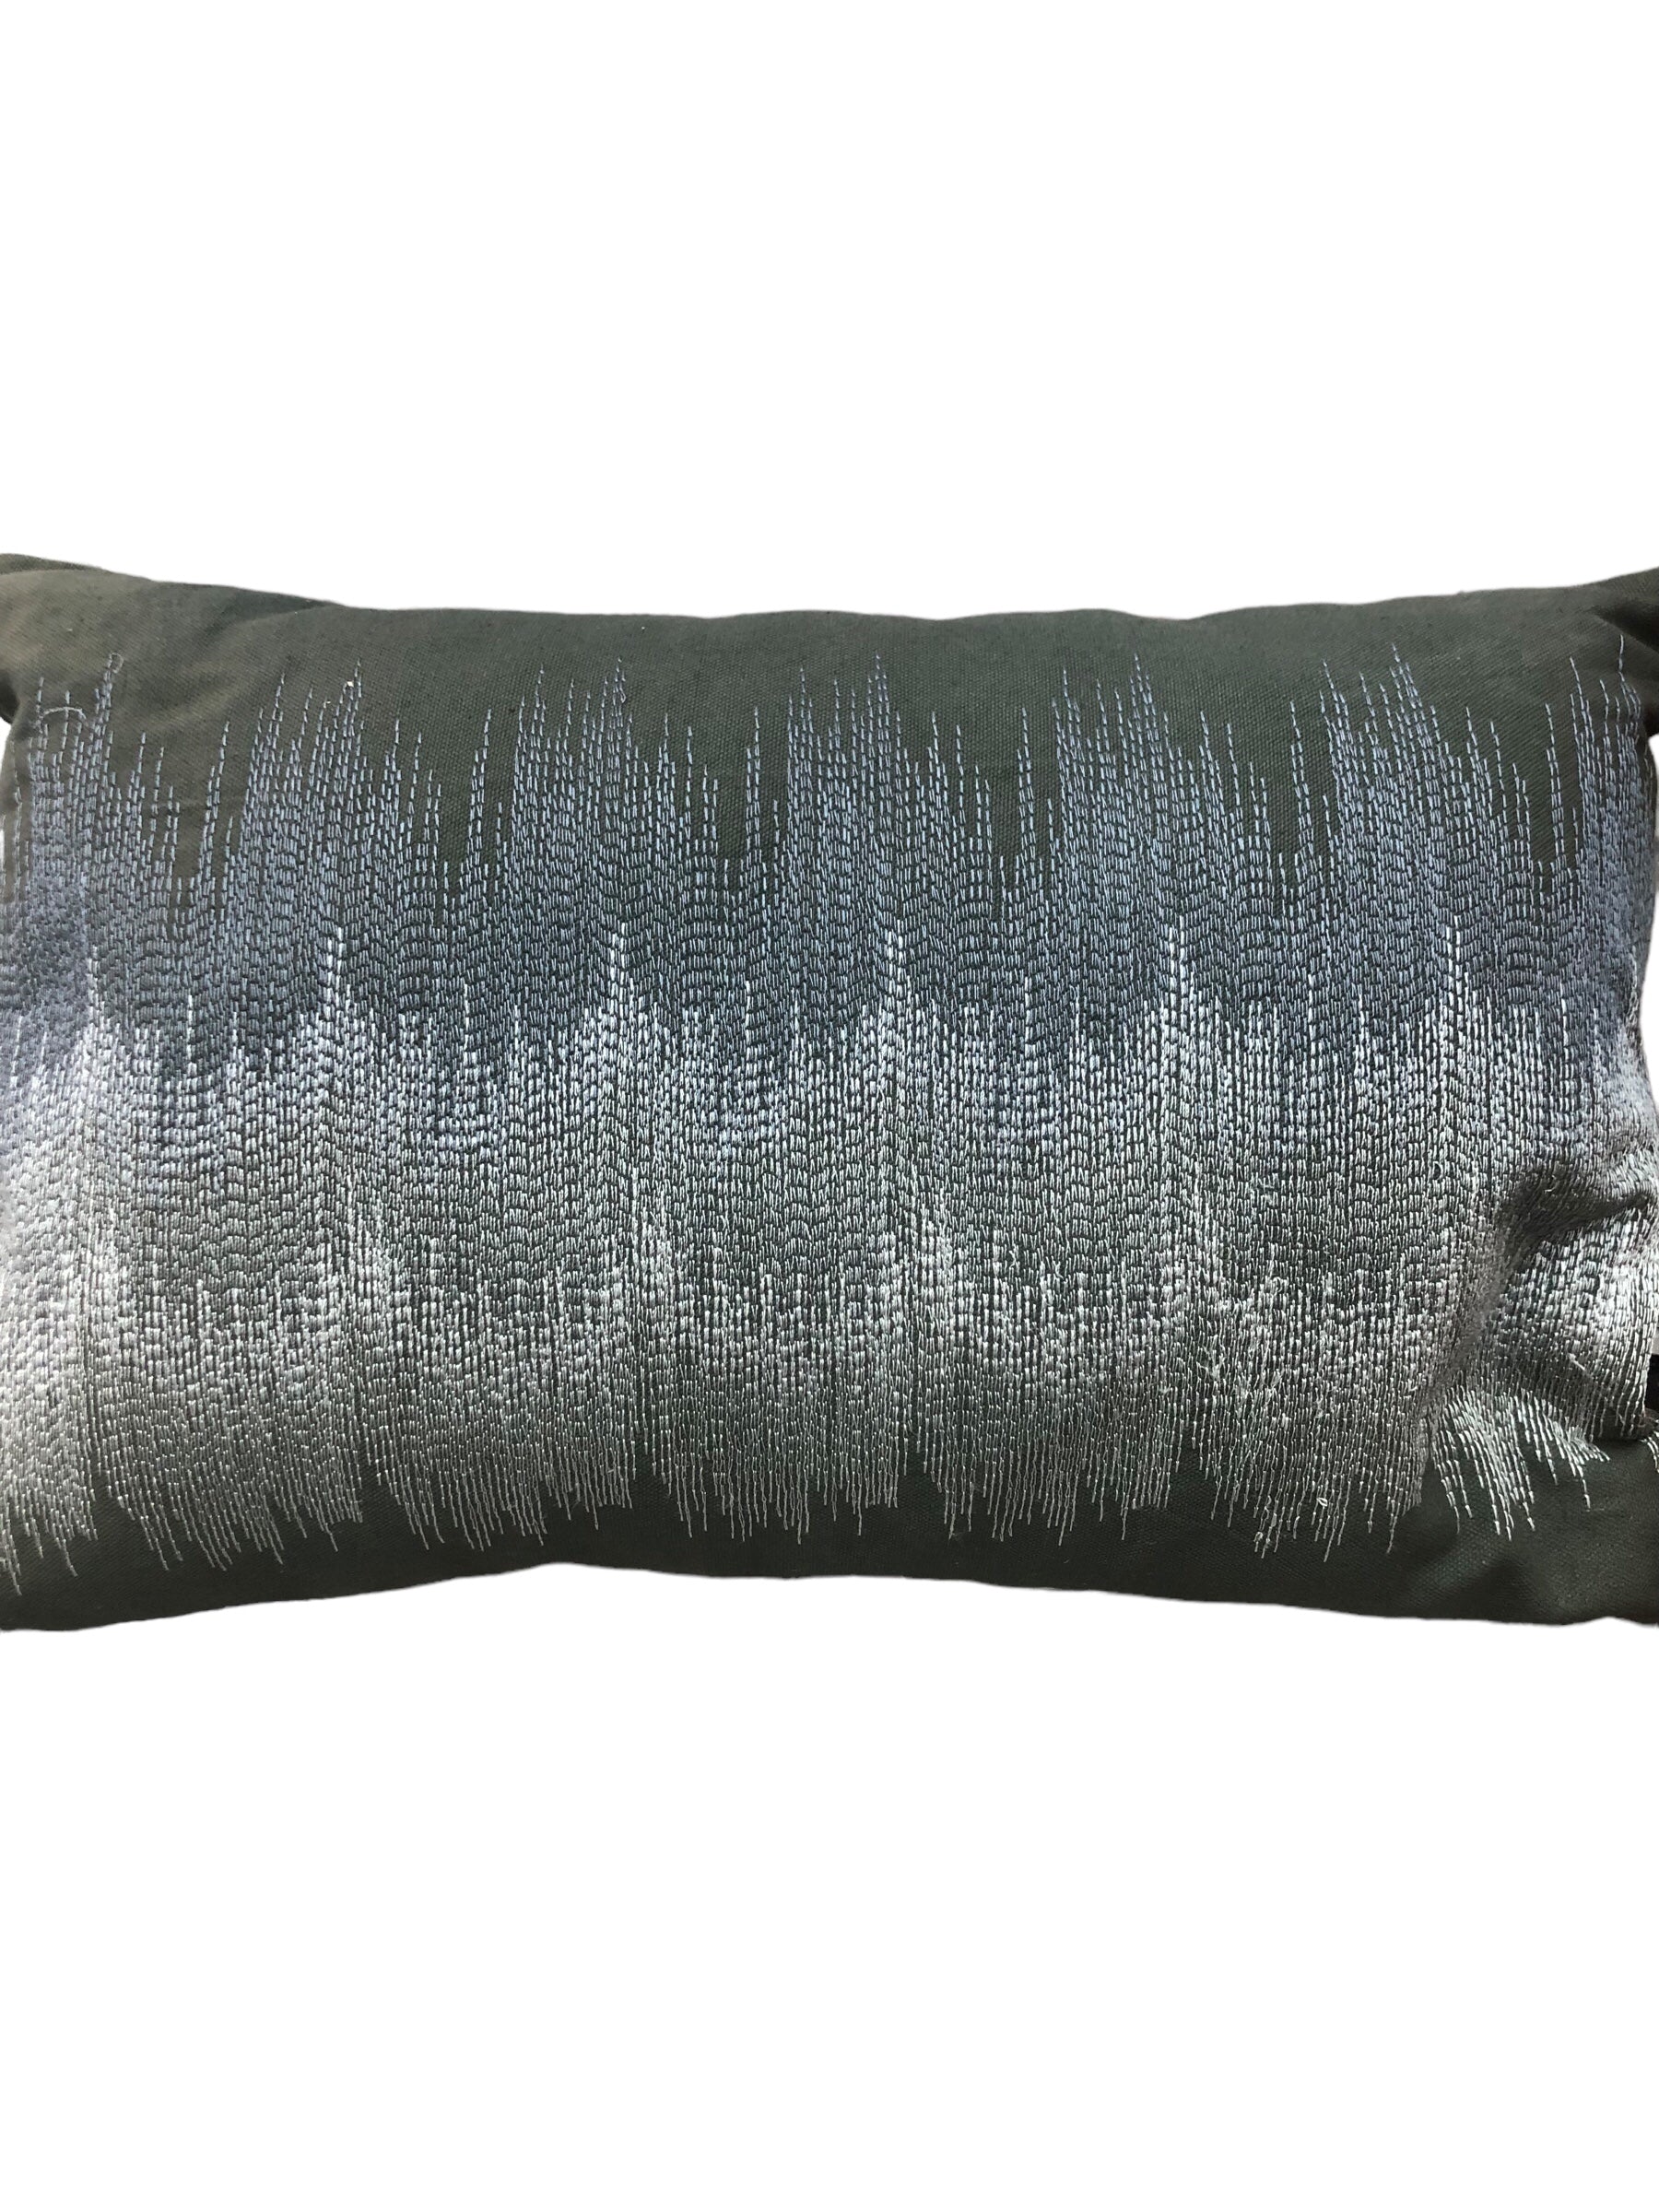 Abstract Black/Grey/Blue Pillow